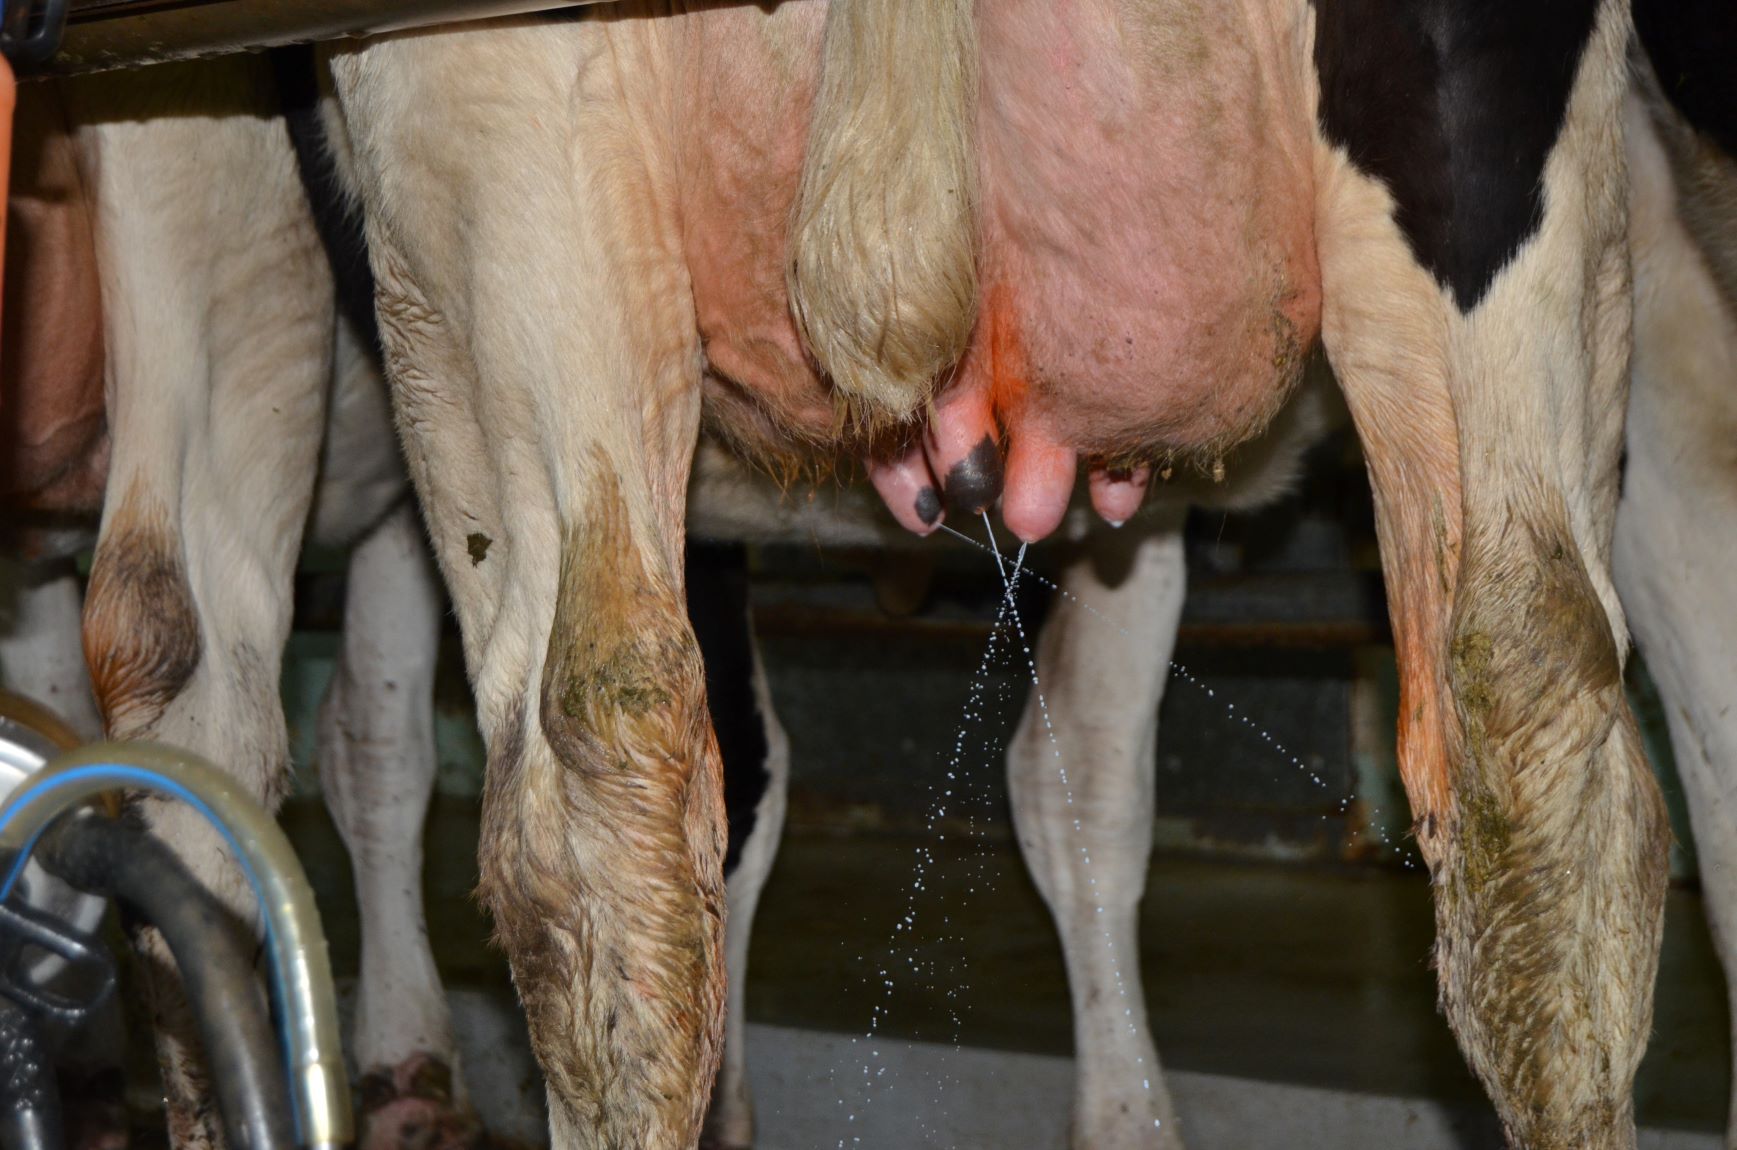 Dairy cows being prepped to be milked